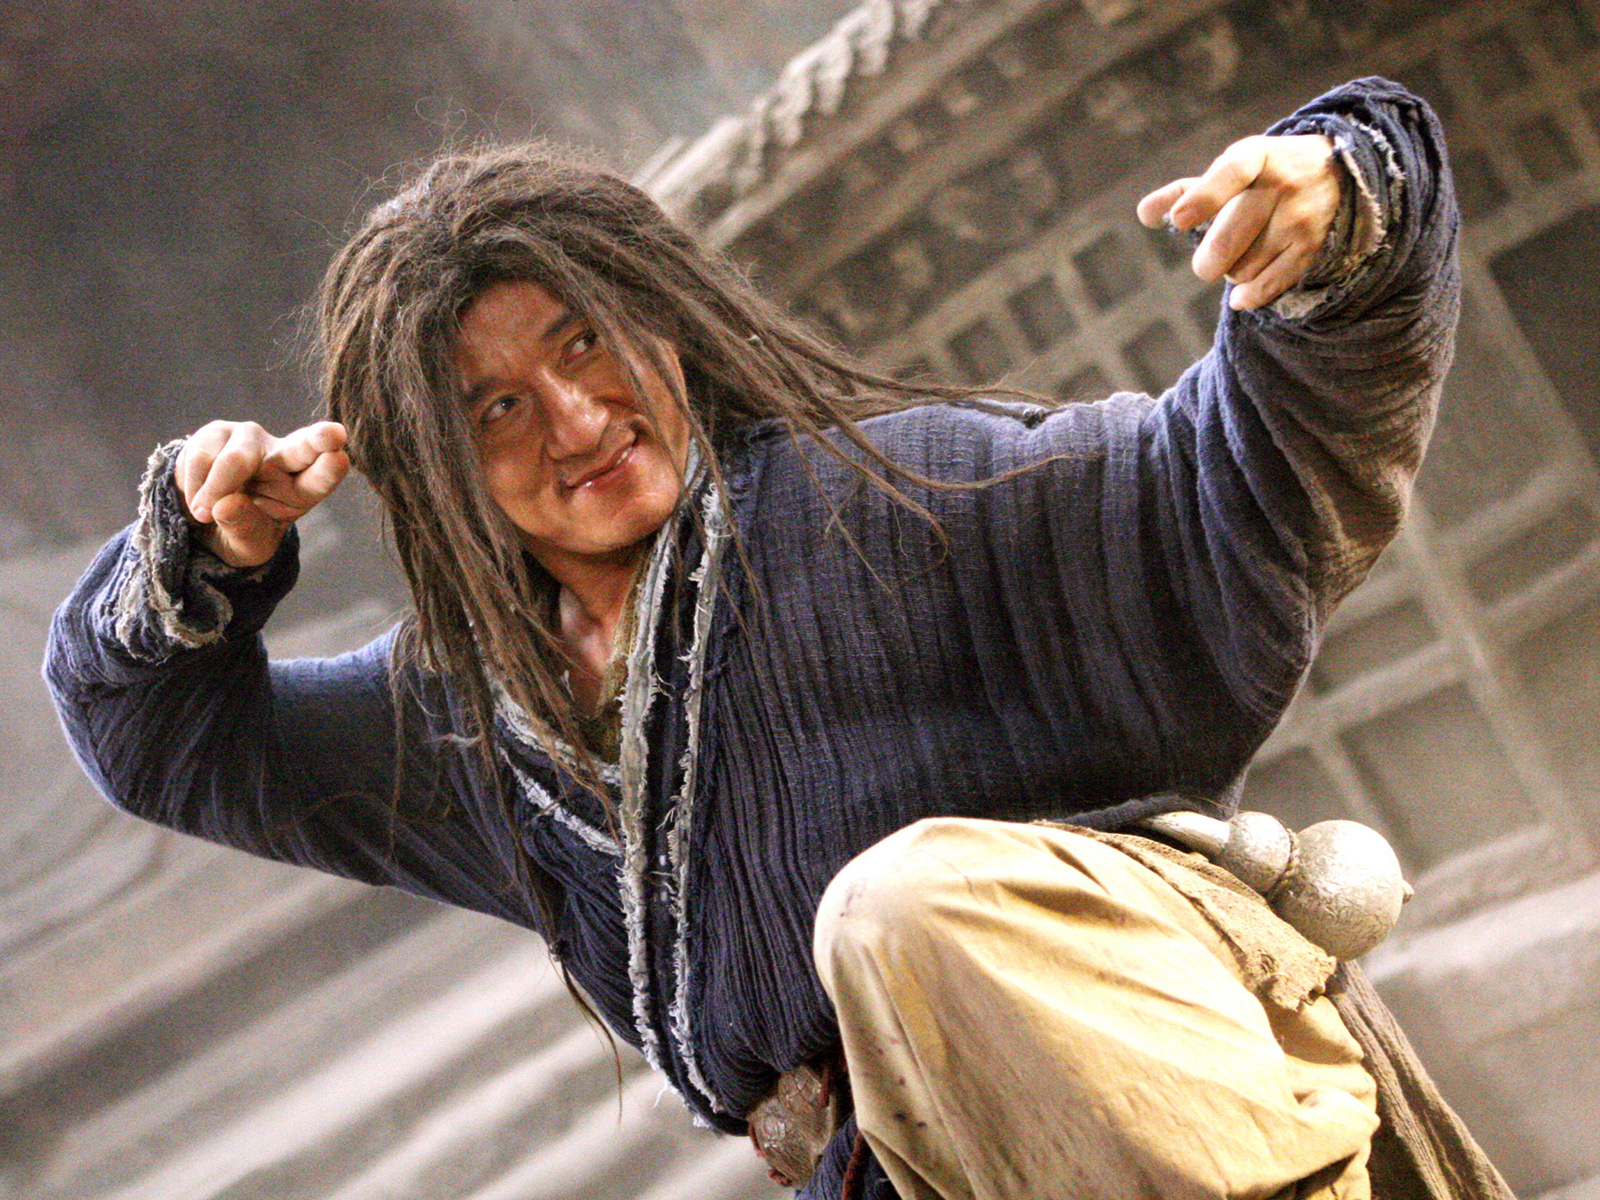 jackie chan awesome pictures,china hero jackie chan,jackie chan hd  wallpapers - Hot PHOTOSHOOT Bollywood, Hollywood, Indian Actress HQ Bikini,  Swimsuit, photo Gallery